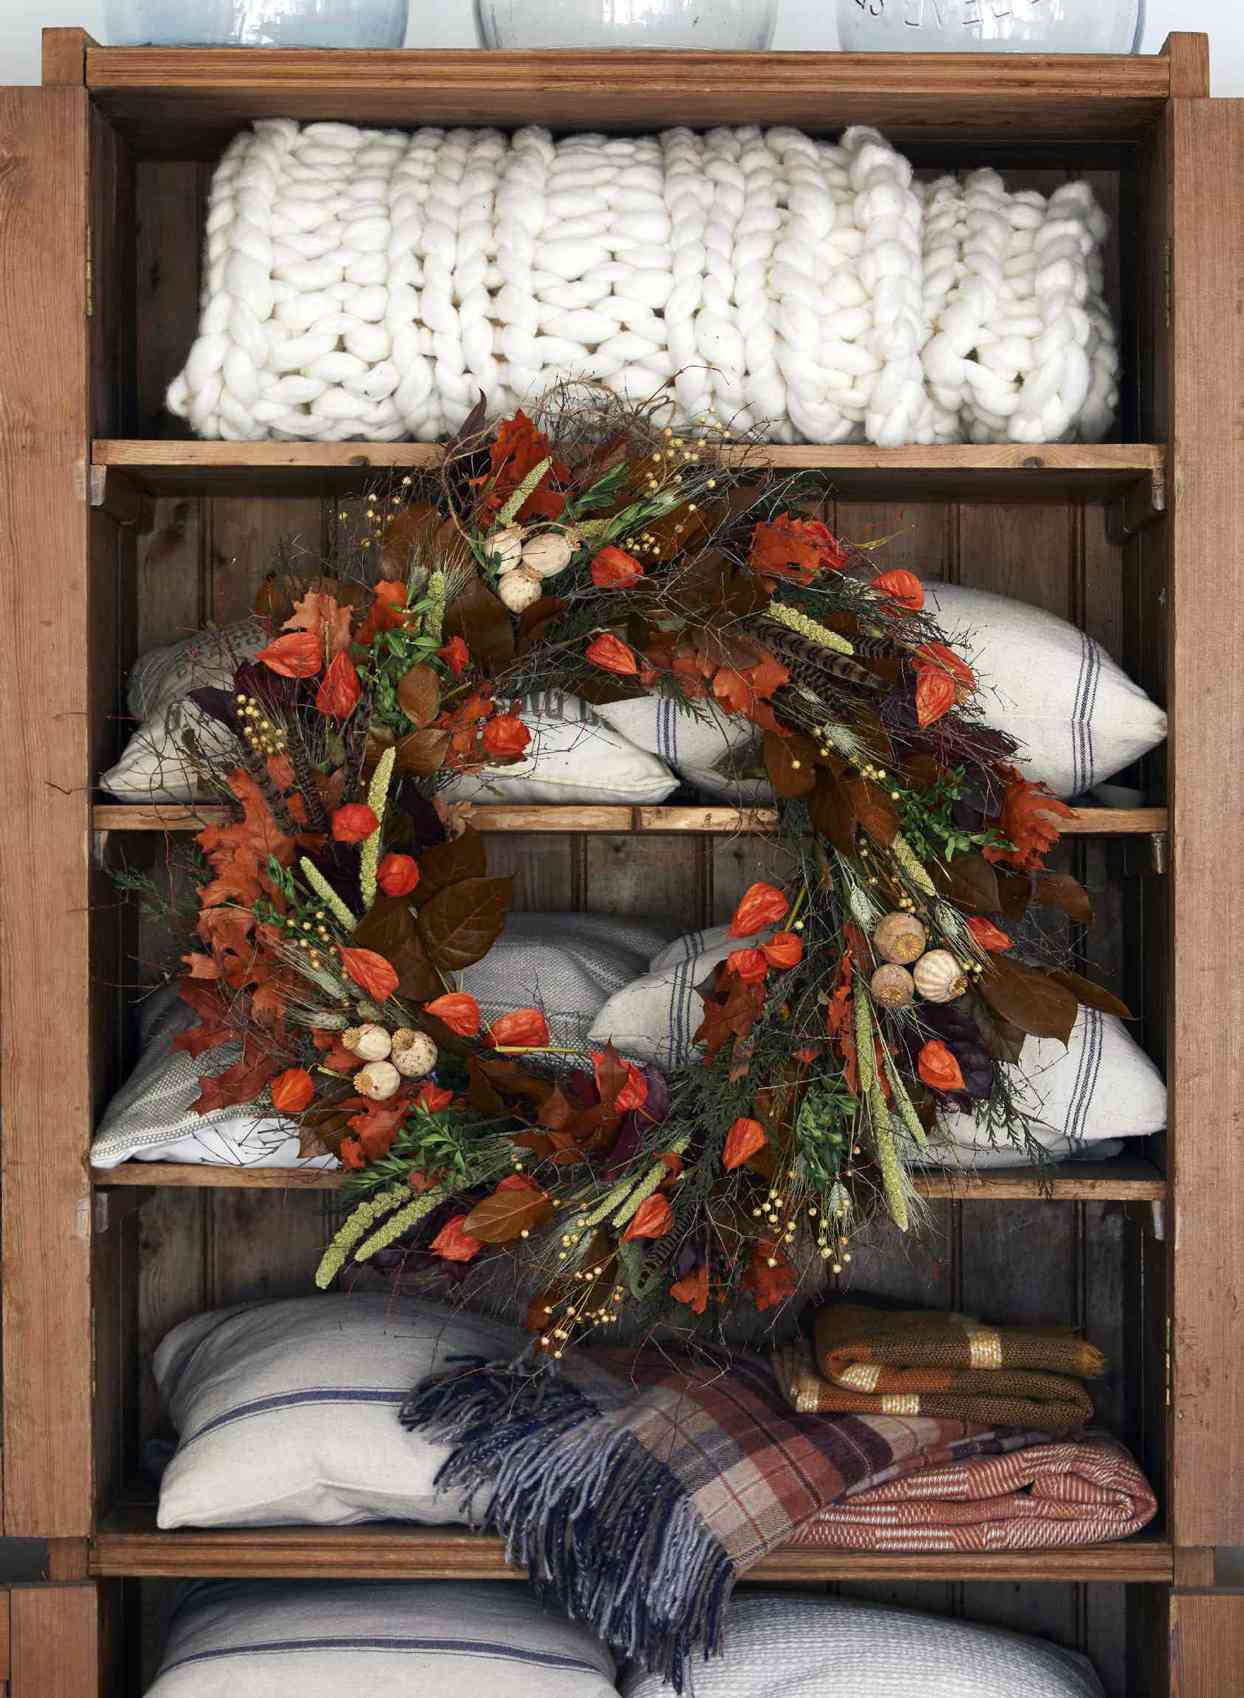 shelves with blankets and wreath